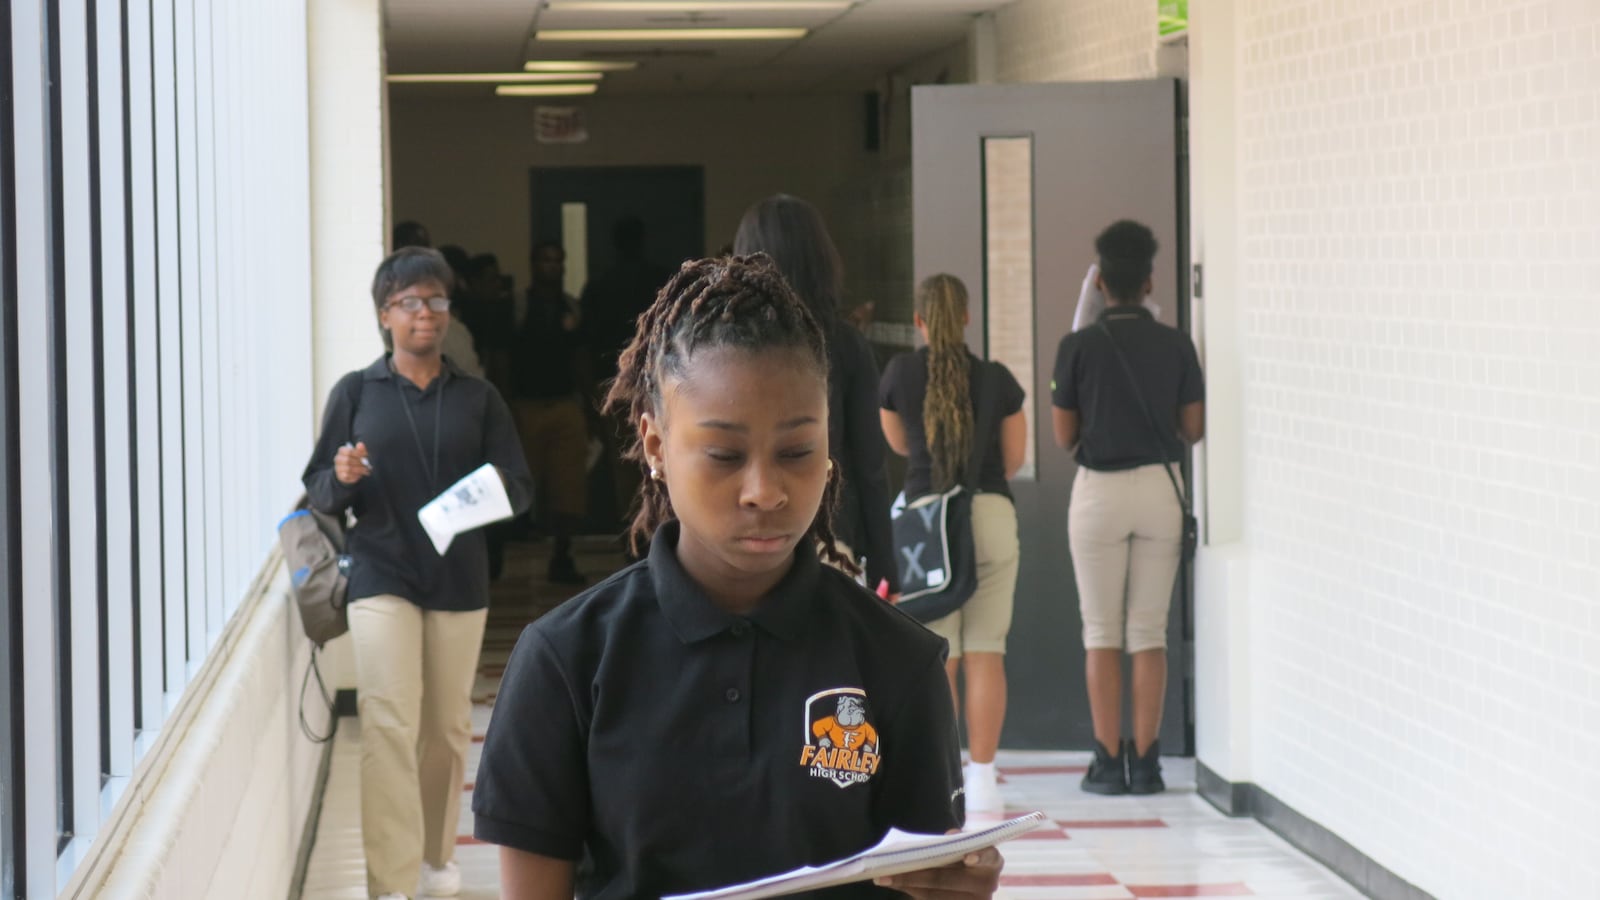 Students check their schedules during a transition at Fairley High School.